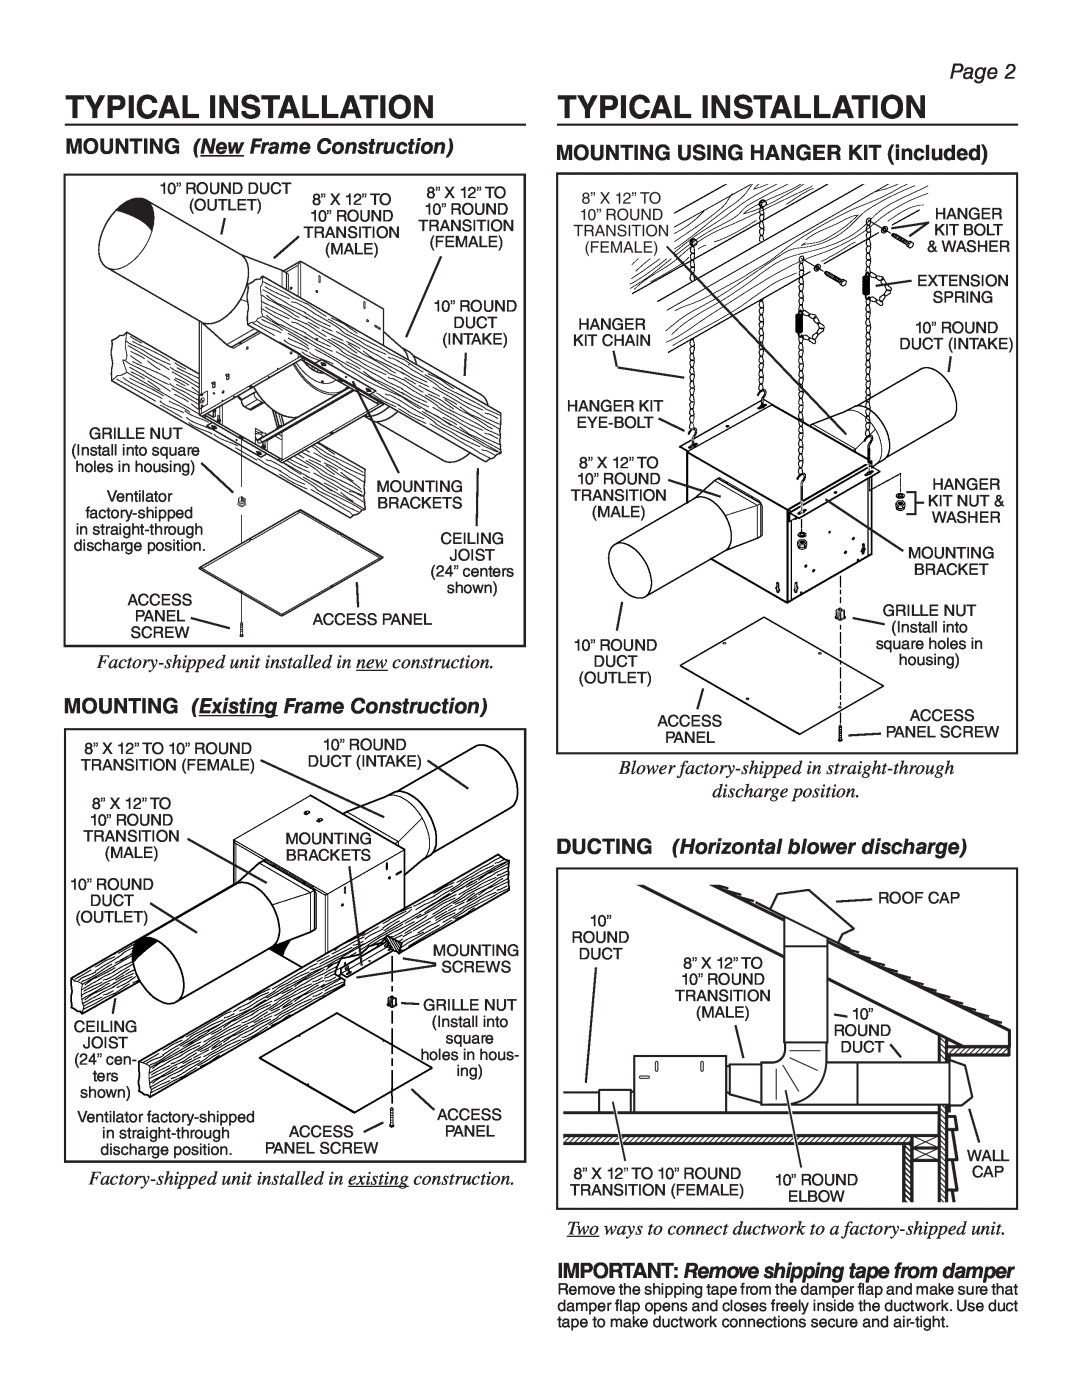 Sub-Zero W362210-482210 Typical Installation, Page, MOUNTING NewFrame Construction, MOUNTING ExistingFrame Construction 